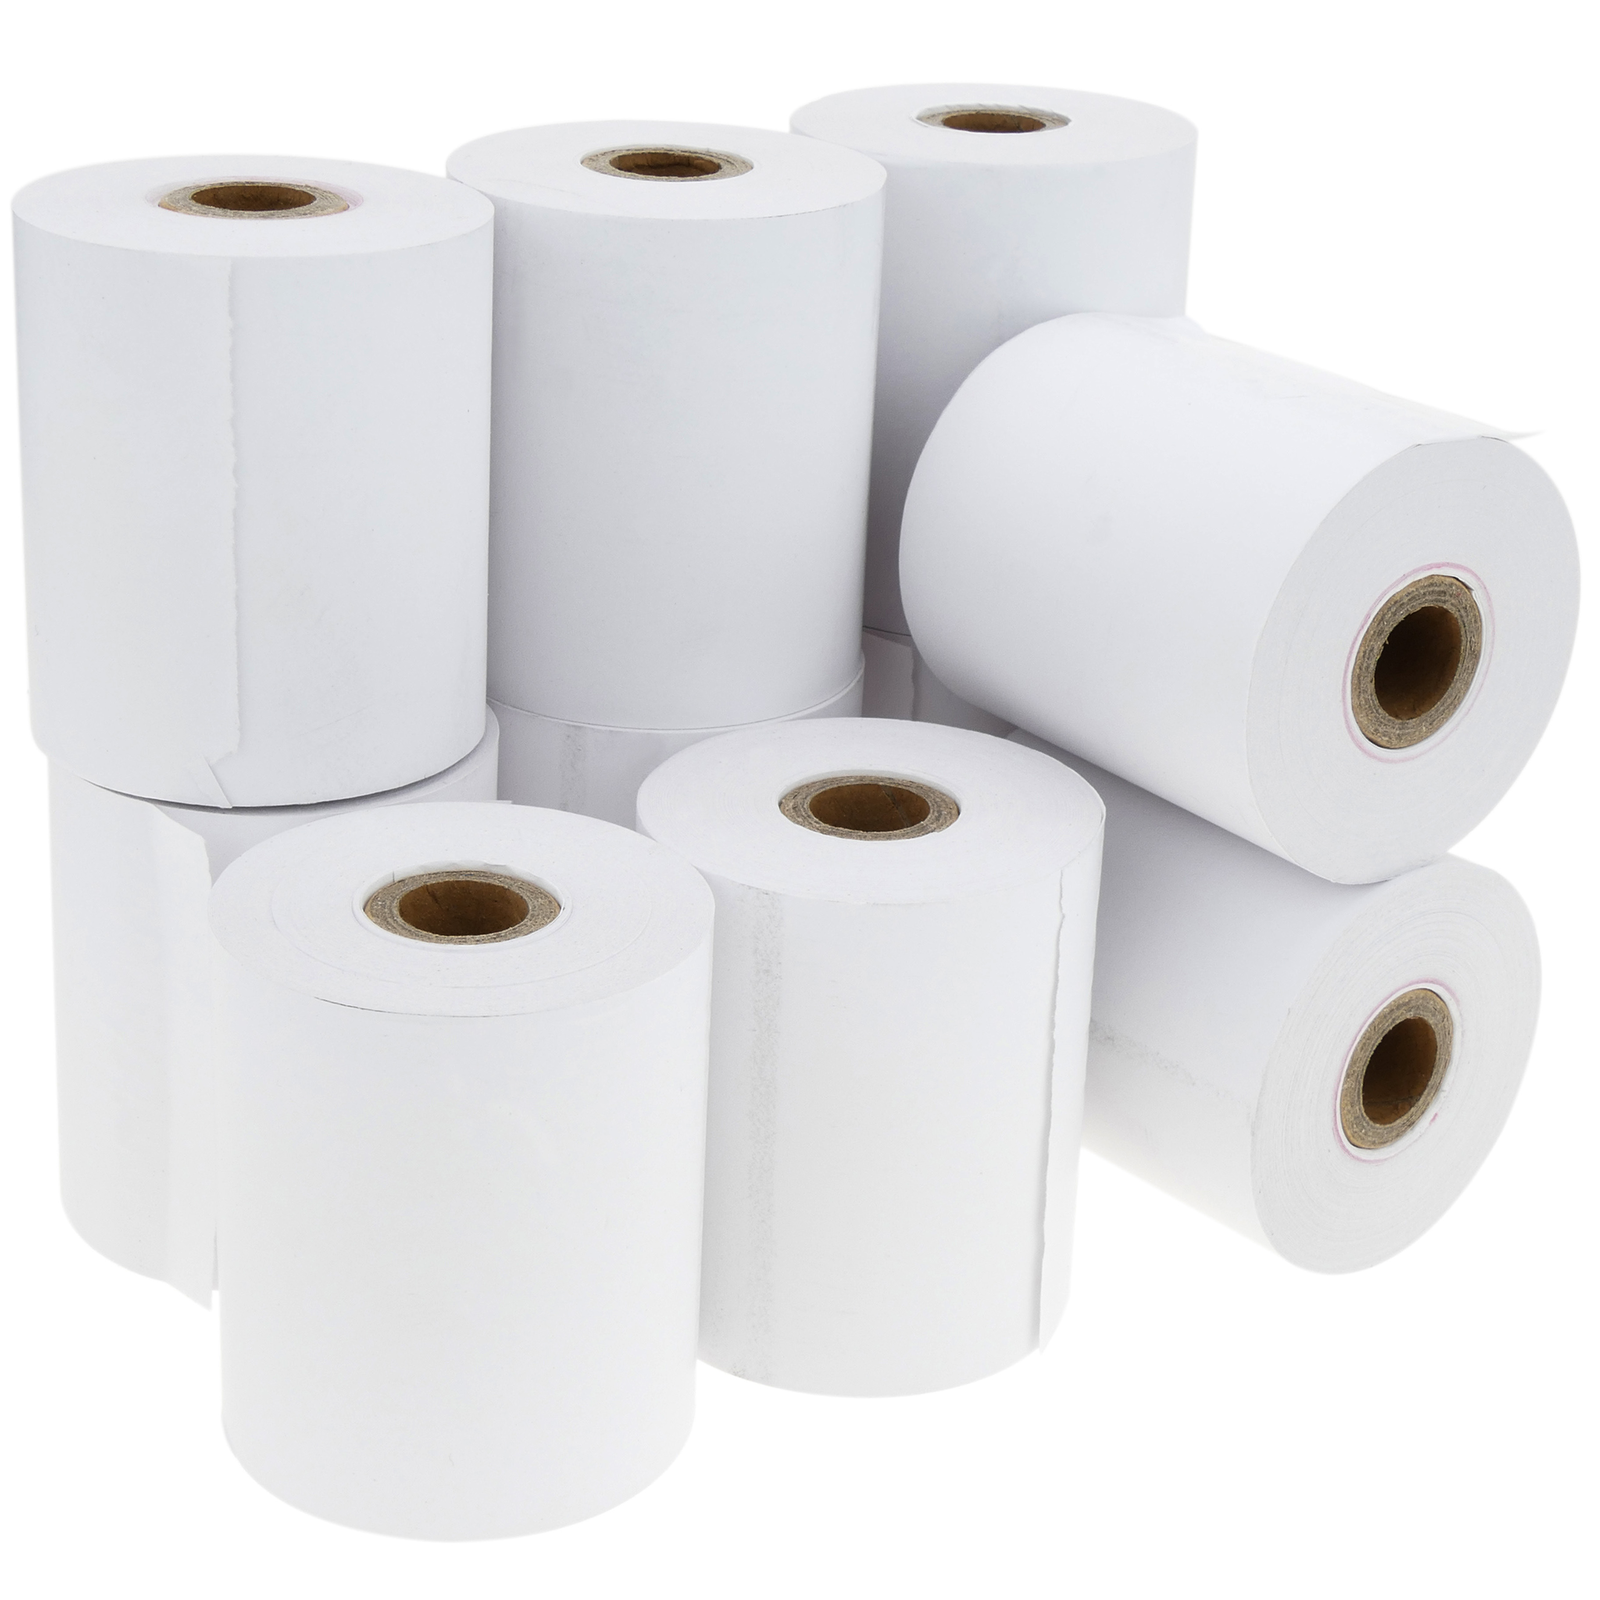 57mm 2.25" Thermal Paper for 58mm POS Register Portable Printer 